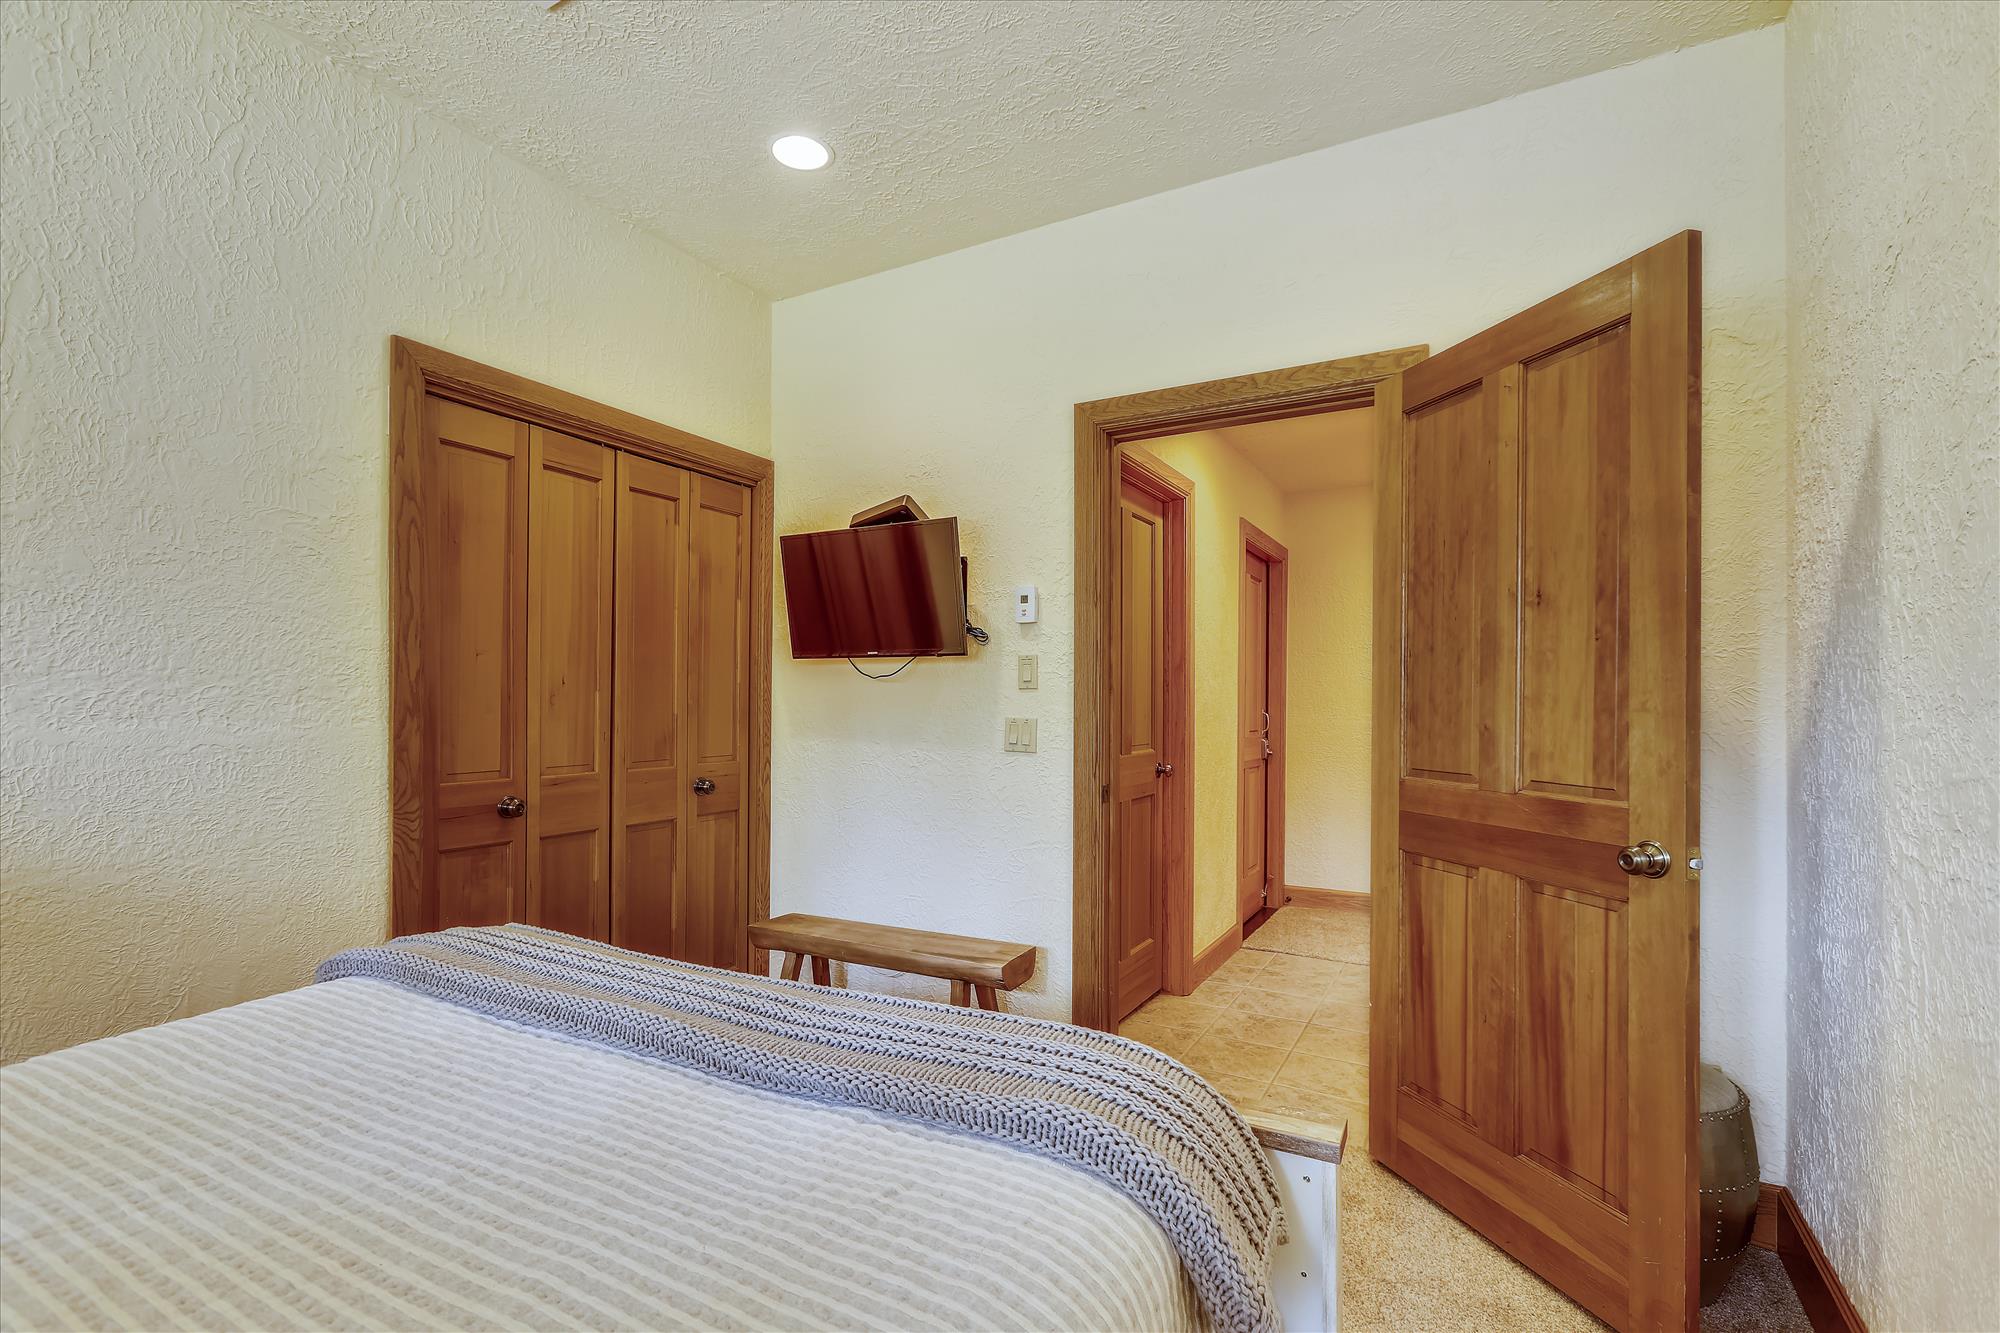 Queen bedroom with closet space and TV - Evergreen Lodge Breckenridge Vacation Rental